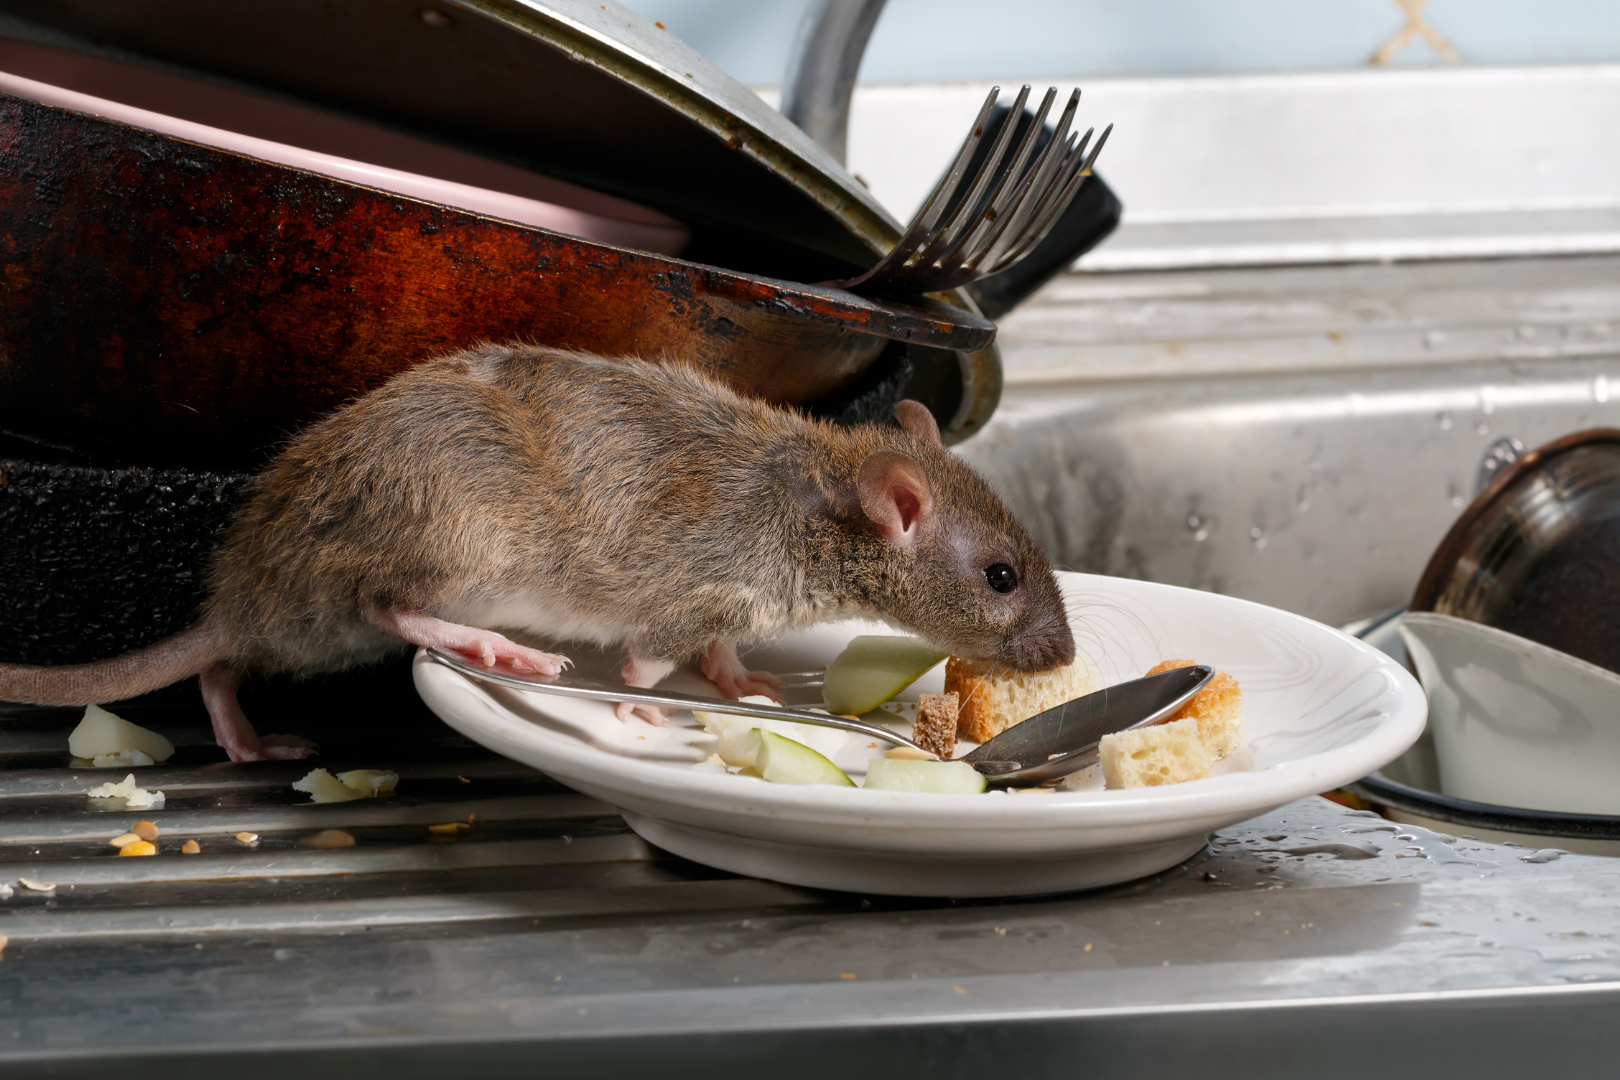 Rodents are considered the largest species of mammals and one of its most destructive